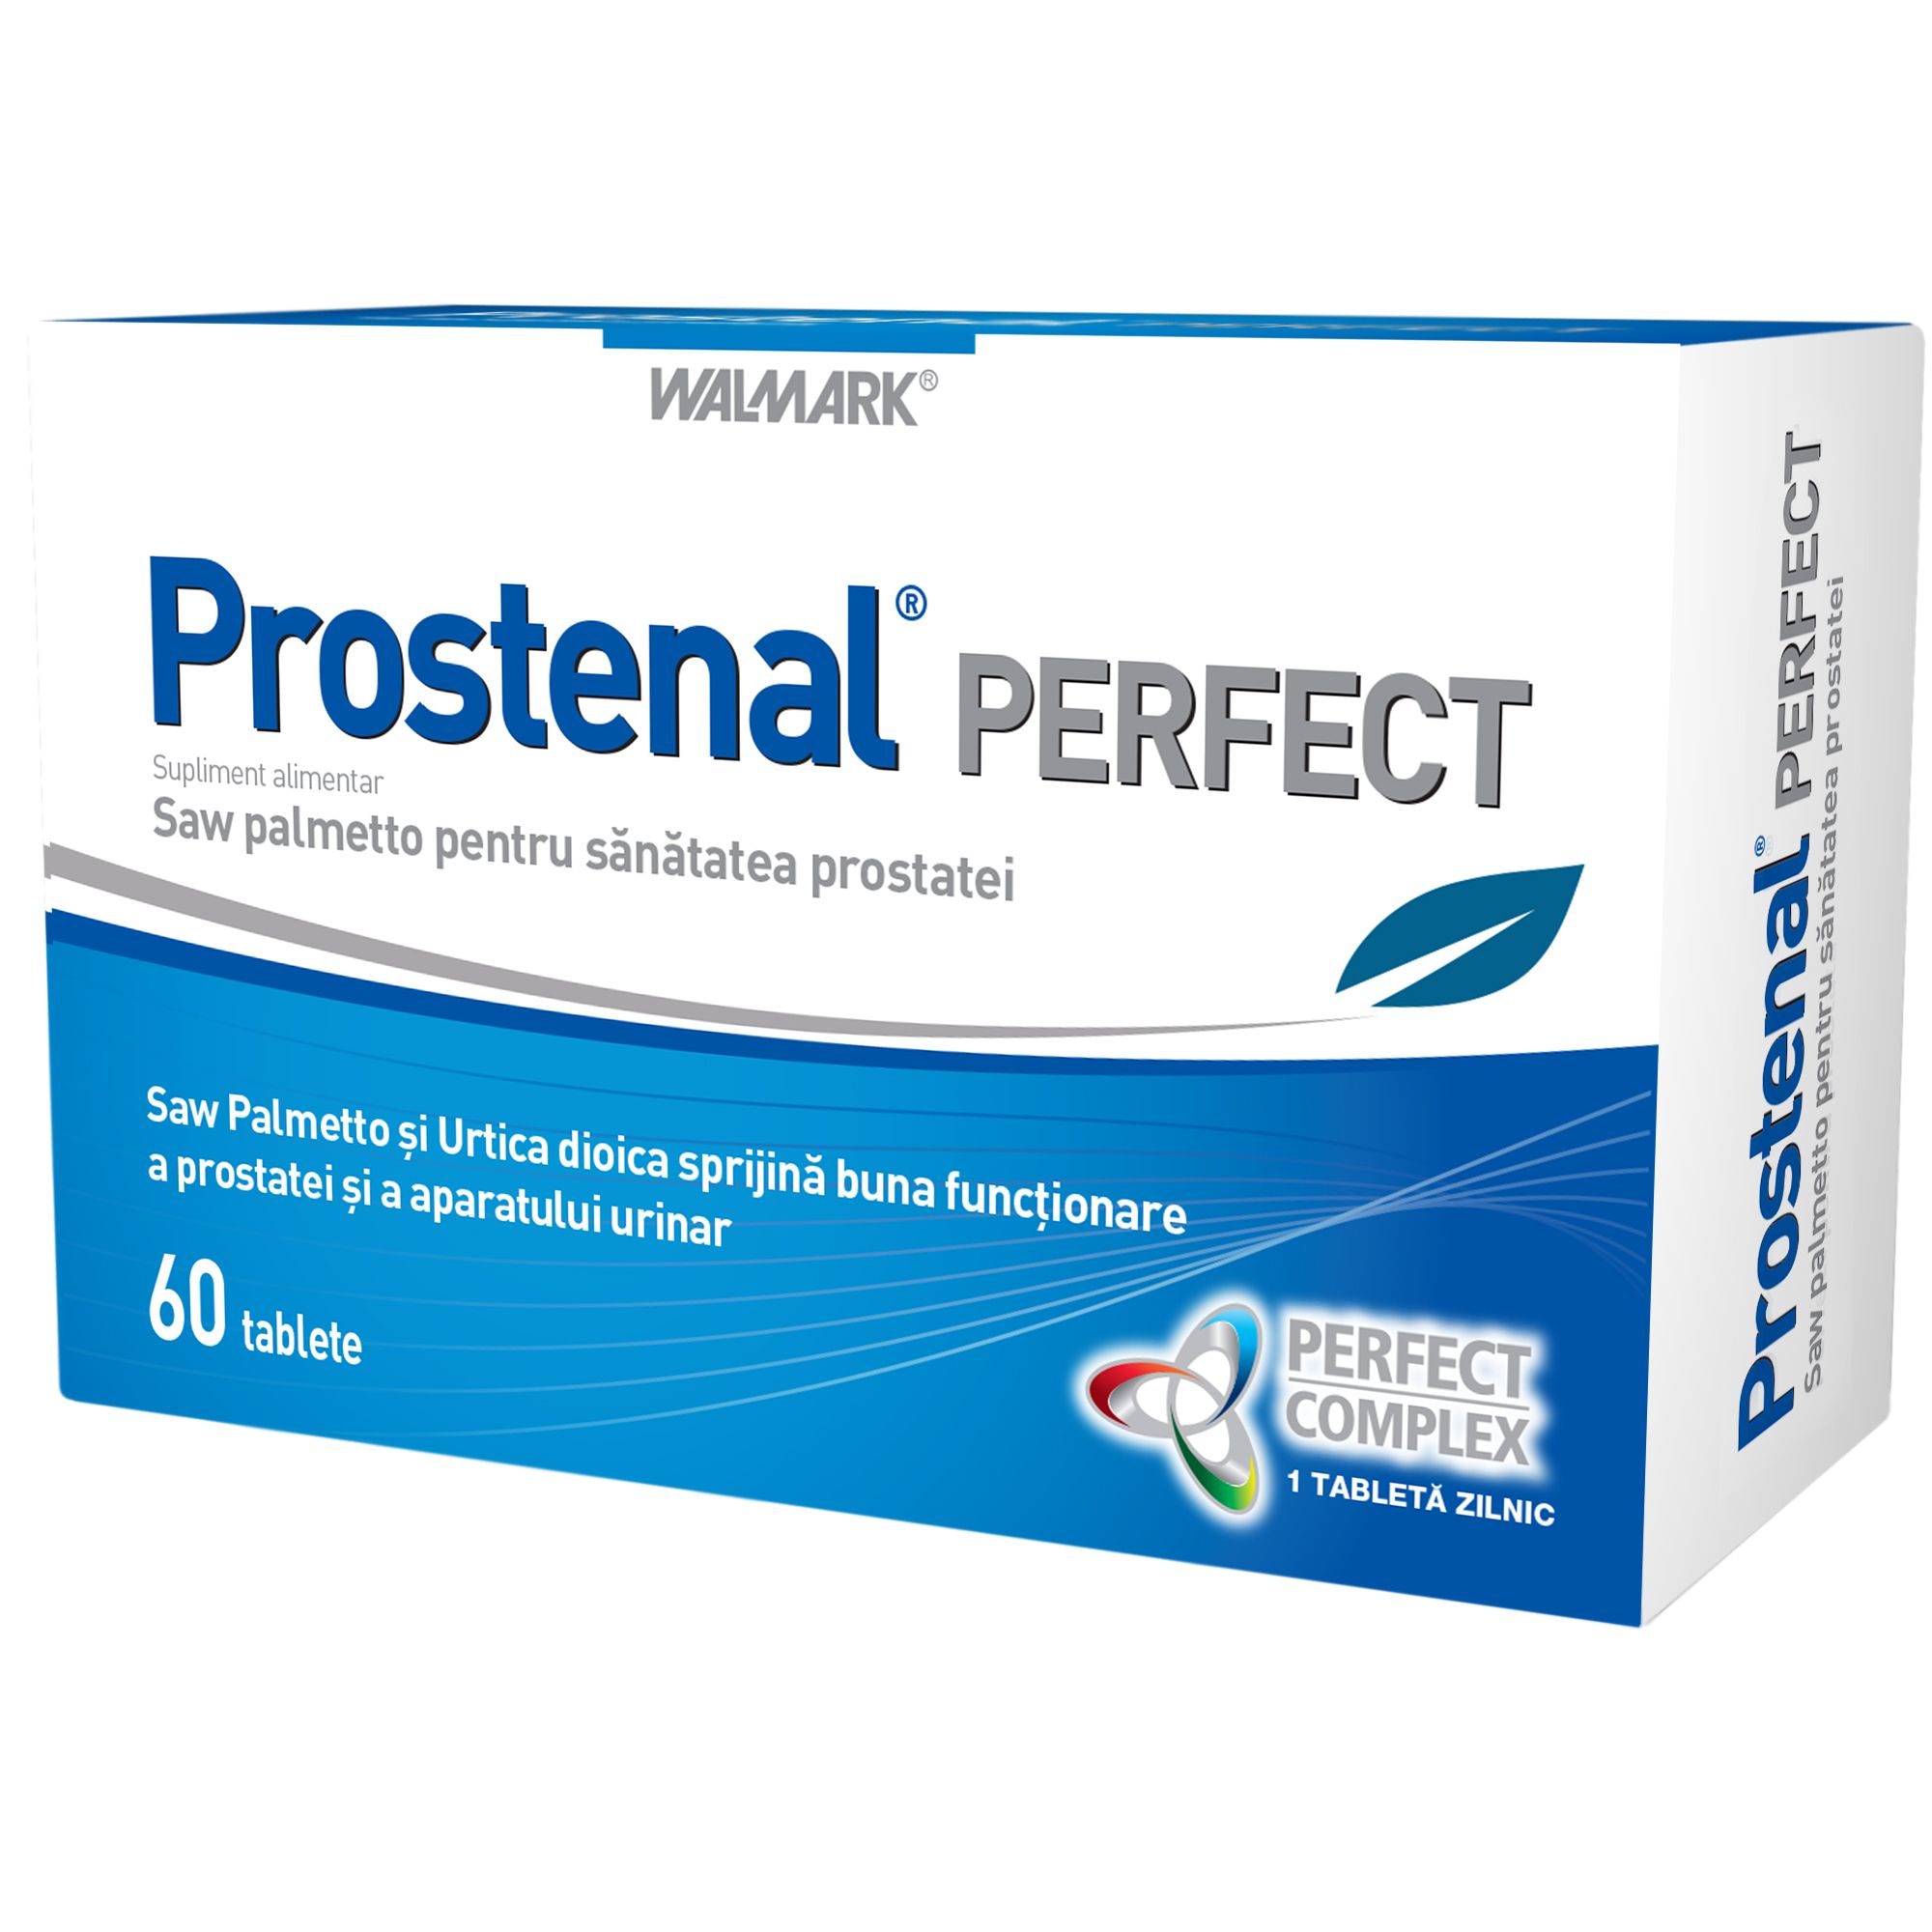 PROSTENAL PERFECT 60 TABLETE